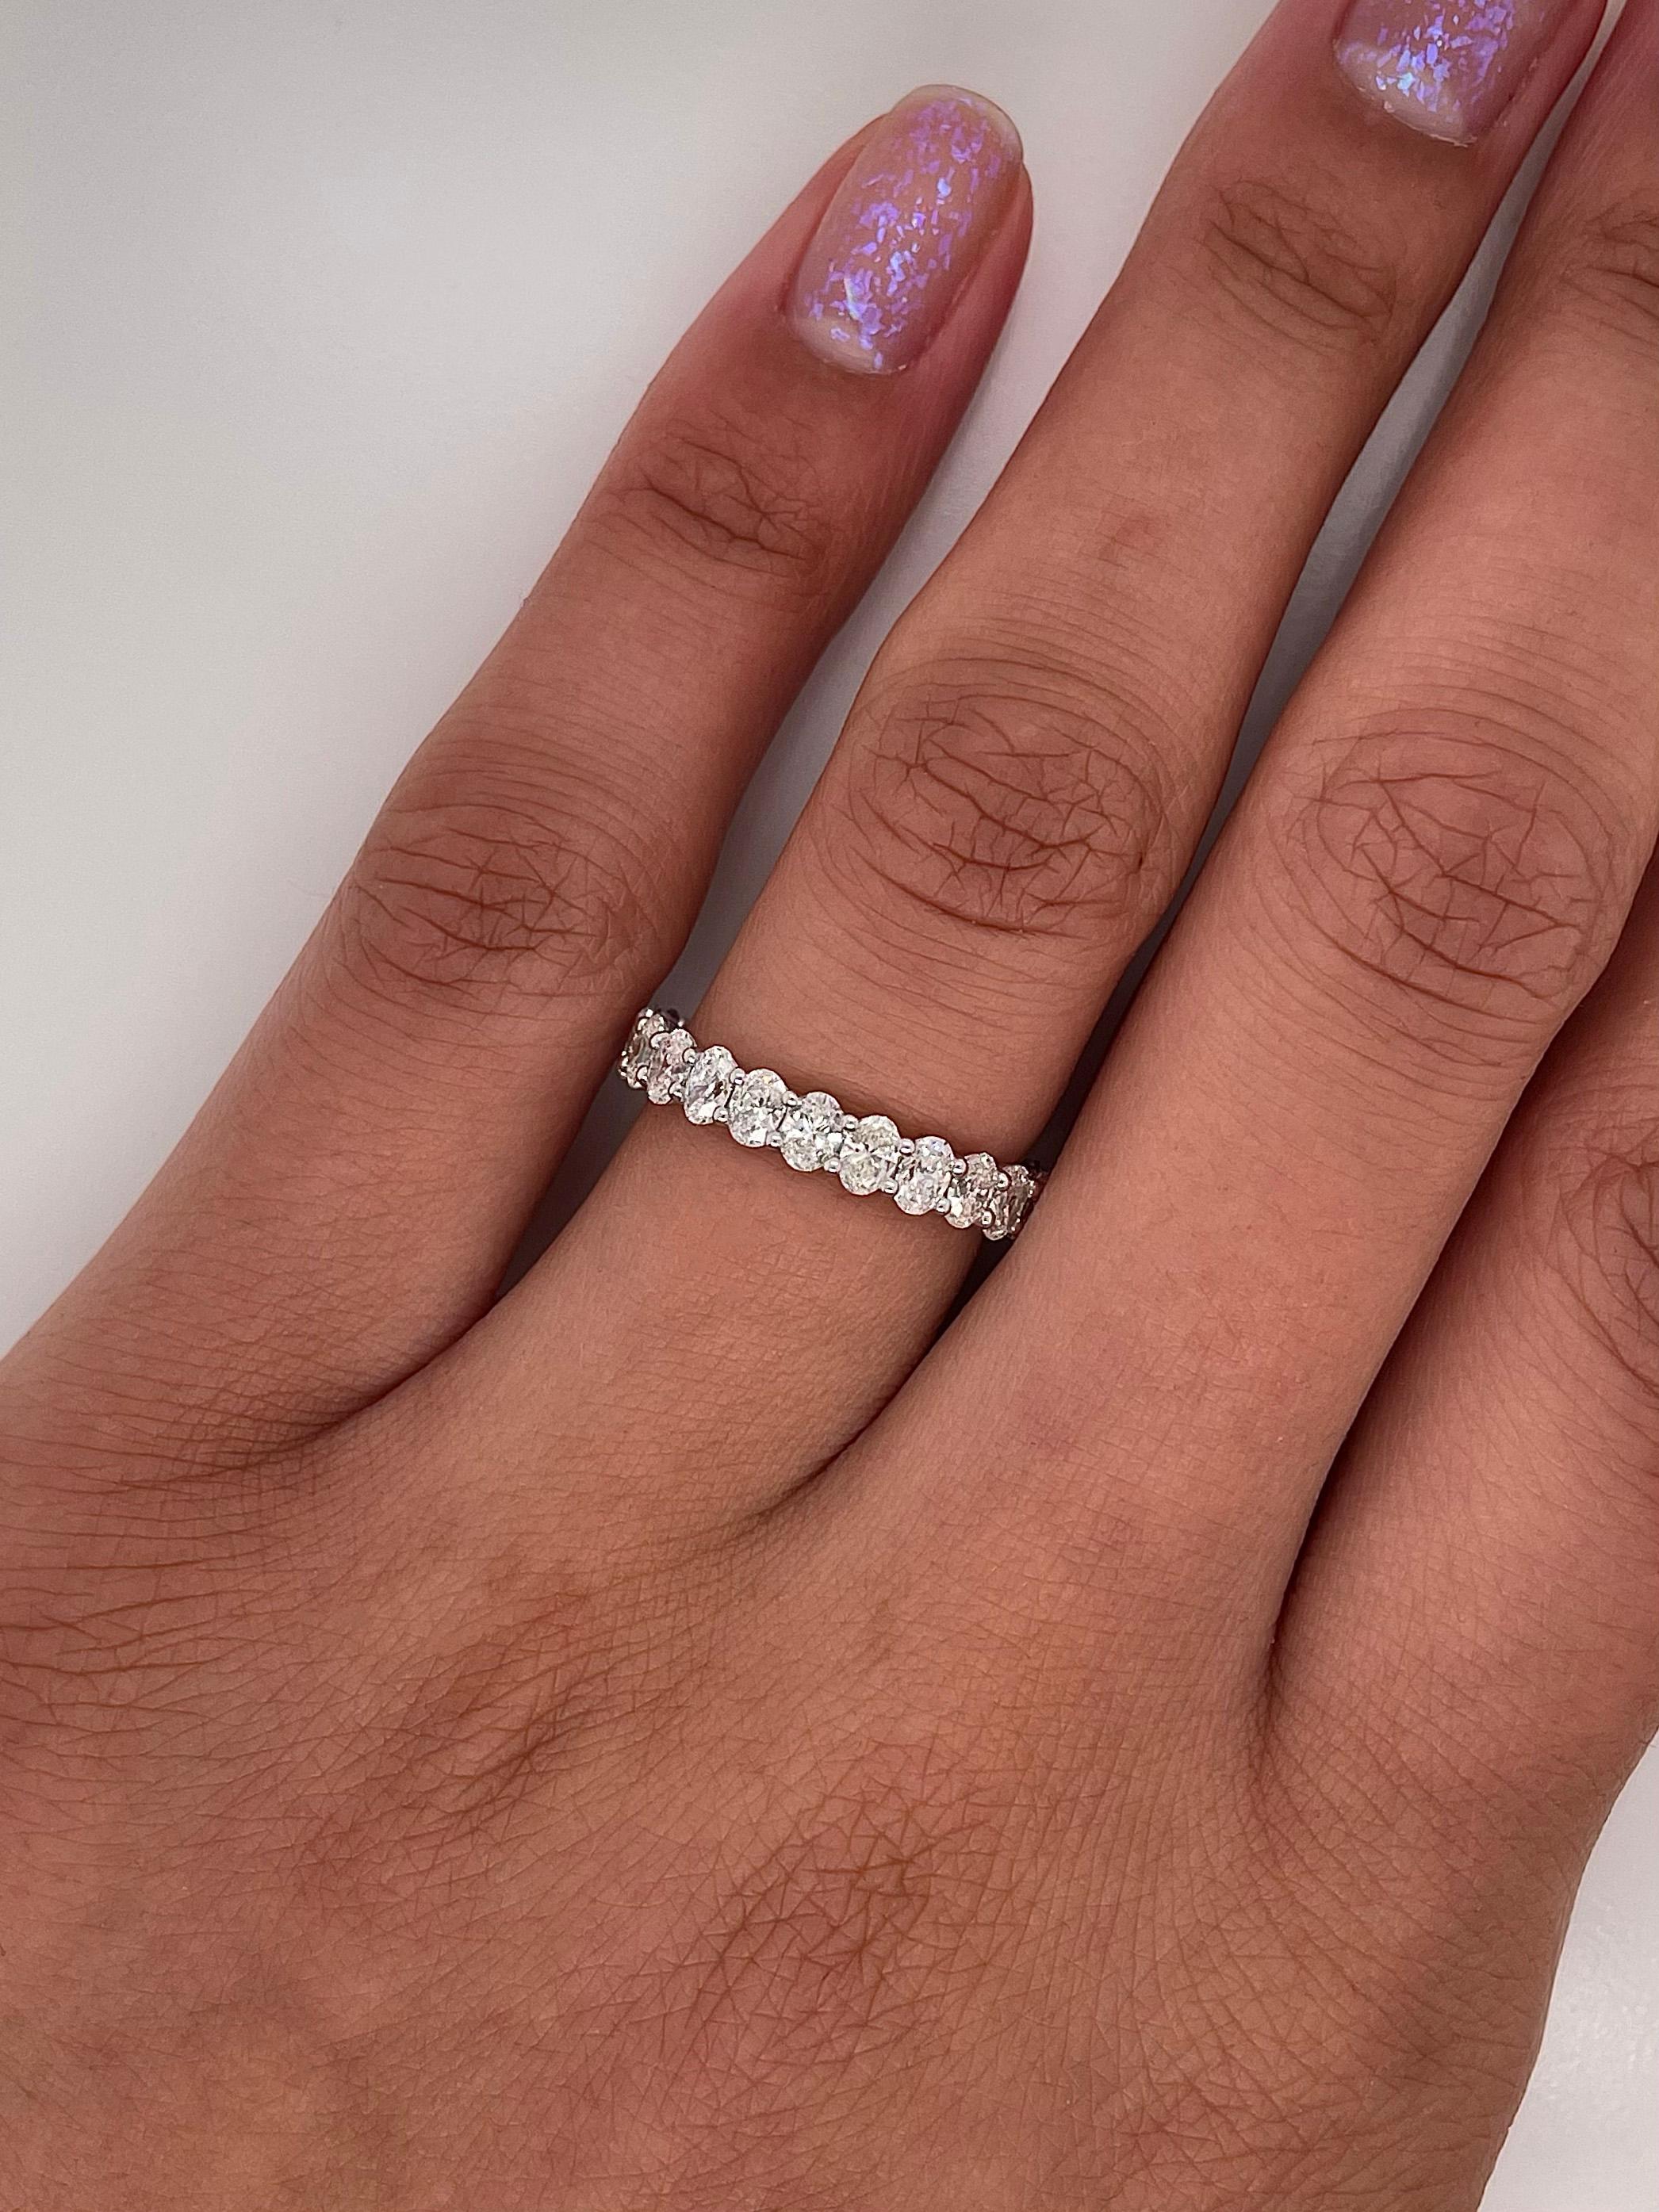 Ladies diamond Eternity band carries 2.13 total Carats of oval cut diamonds placed in platinum.

Size: 6.0
Color: G
Clarity: VS+

This shared prong style Eternity band was handmade by our jewelers in New York City.

 